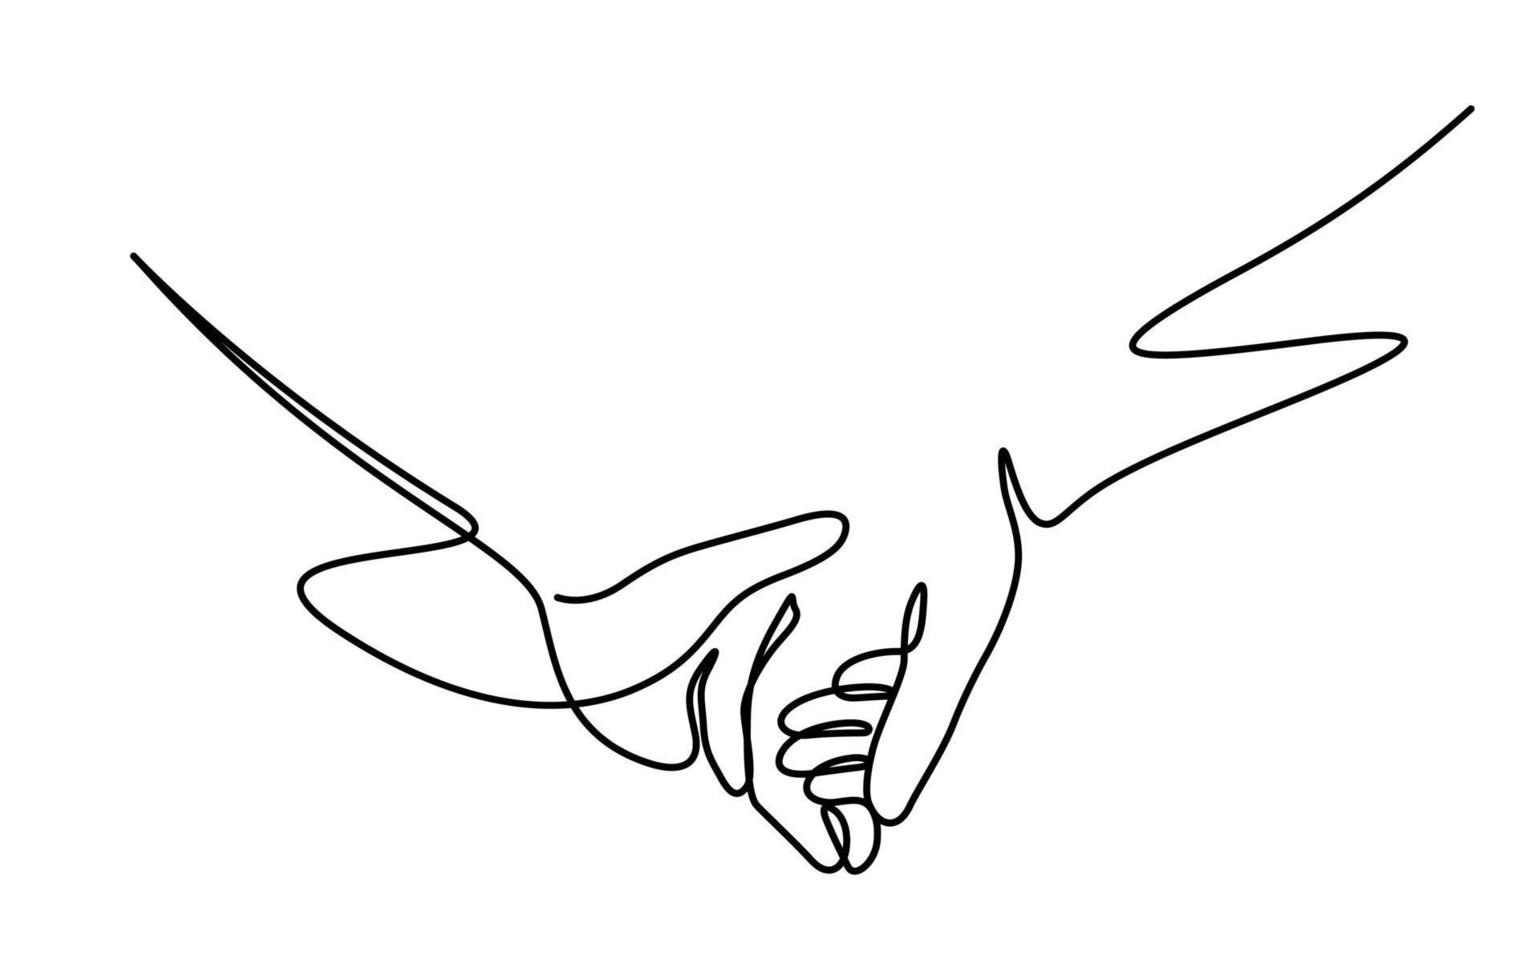 couple hands holding together one line drawing style vector